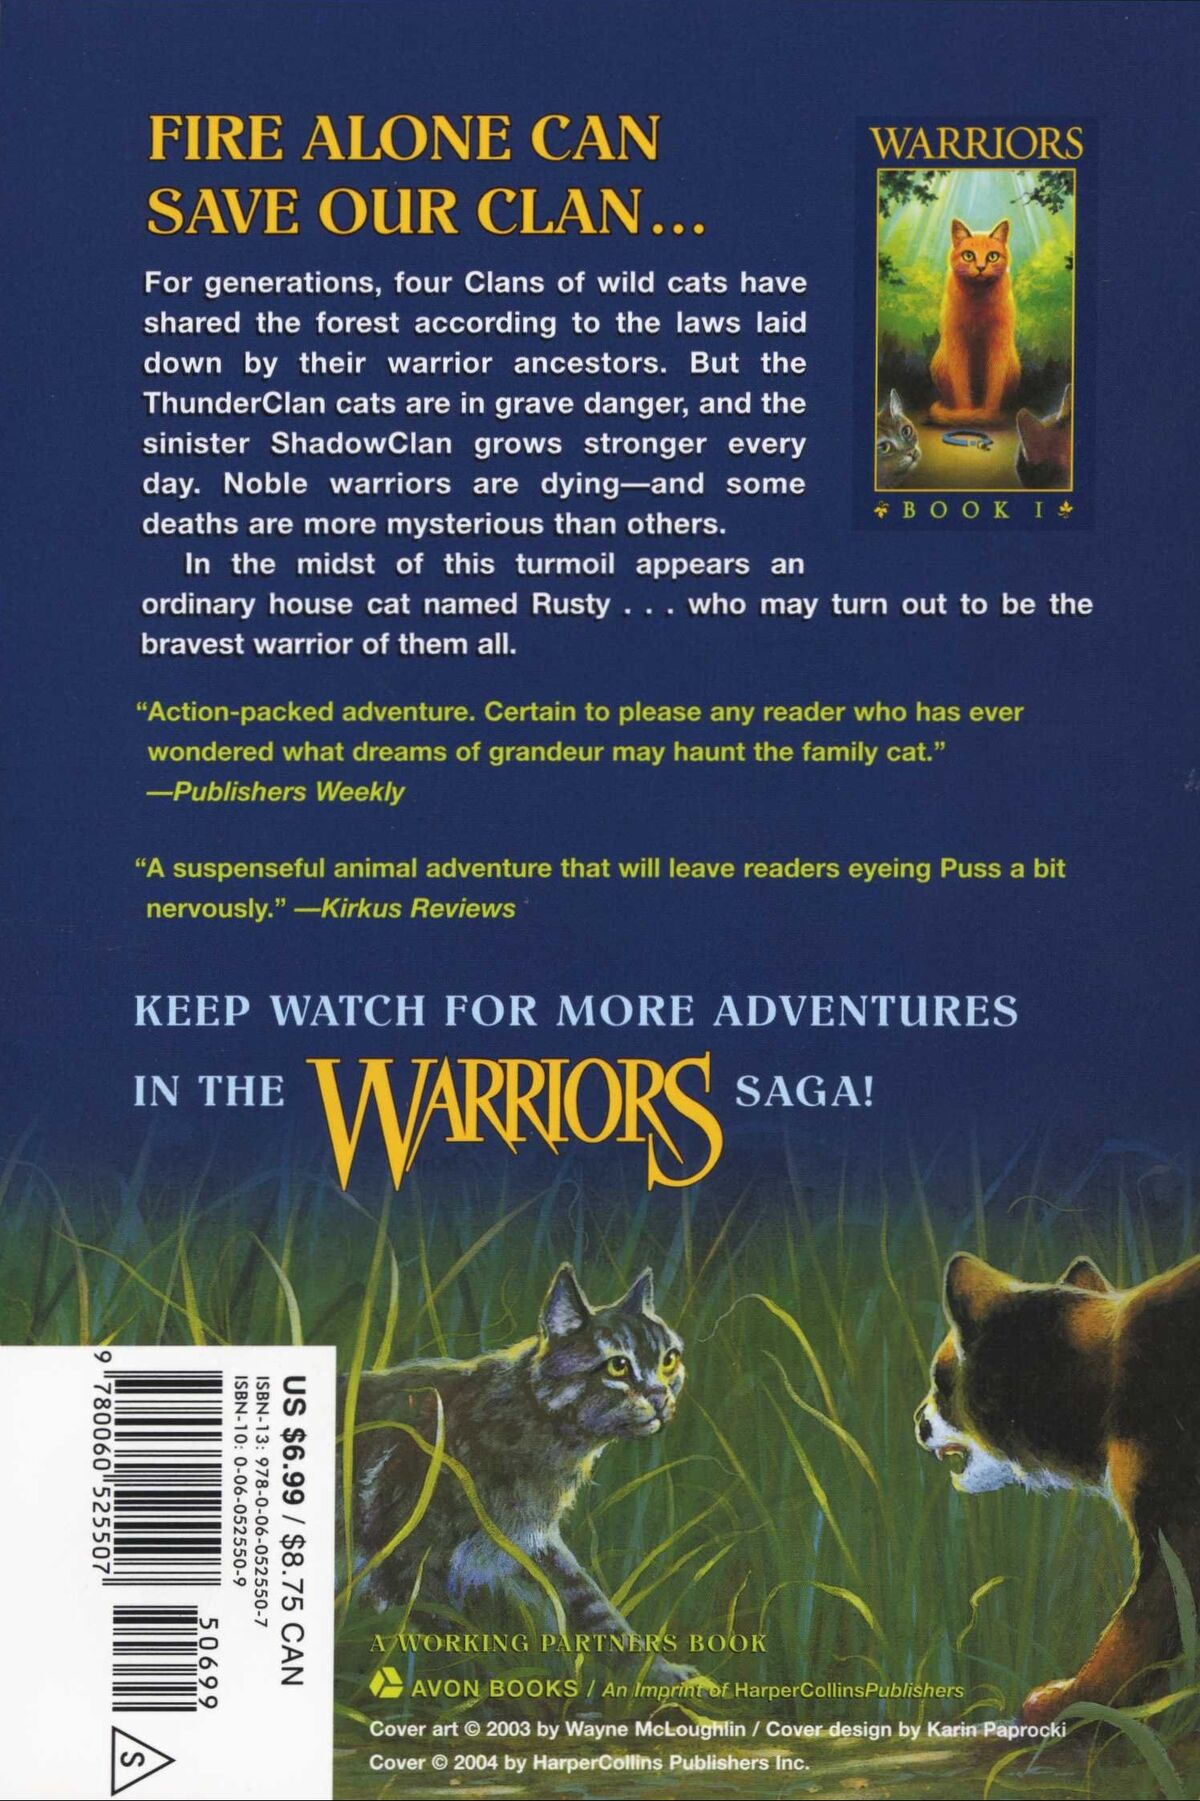 Books for Fans of the Warrior Cats - Fondulac District Library